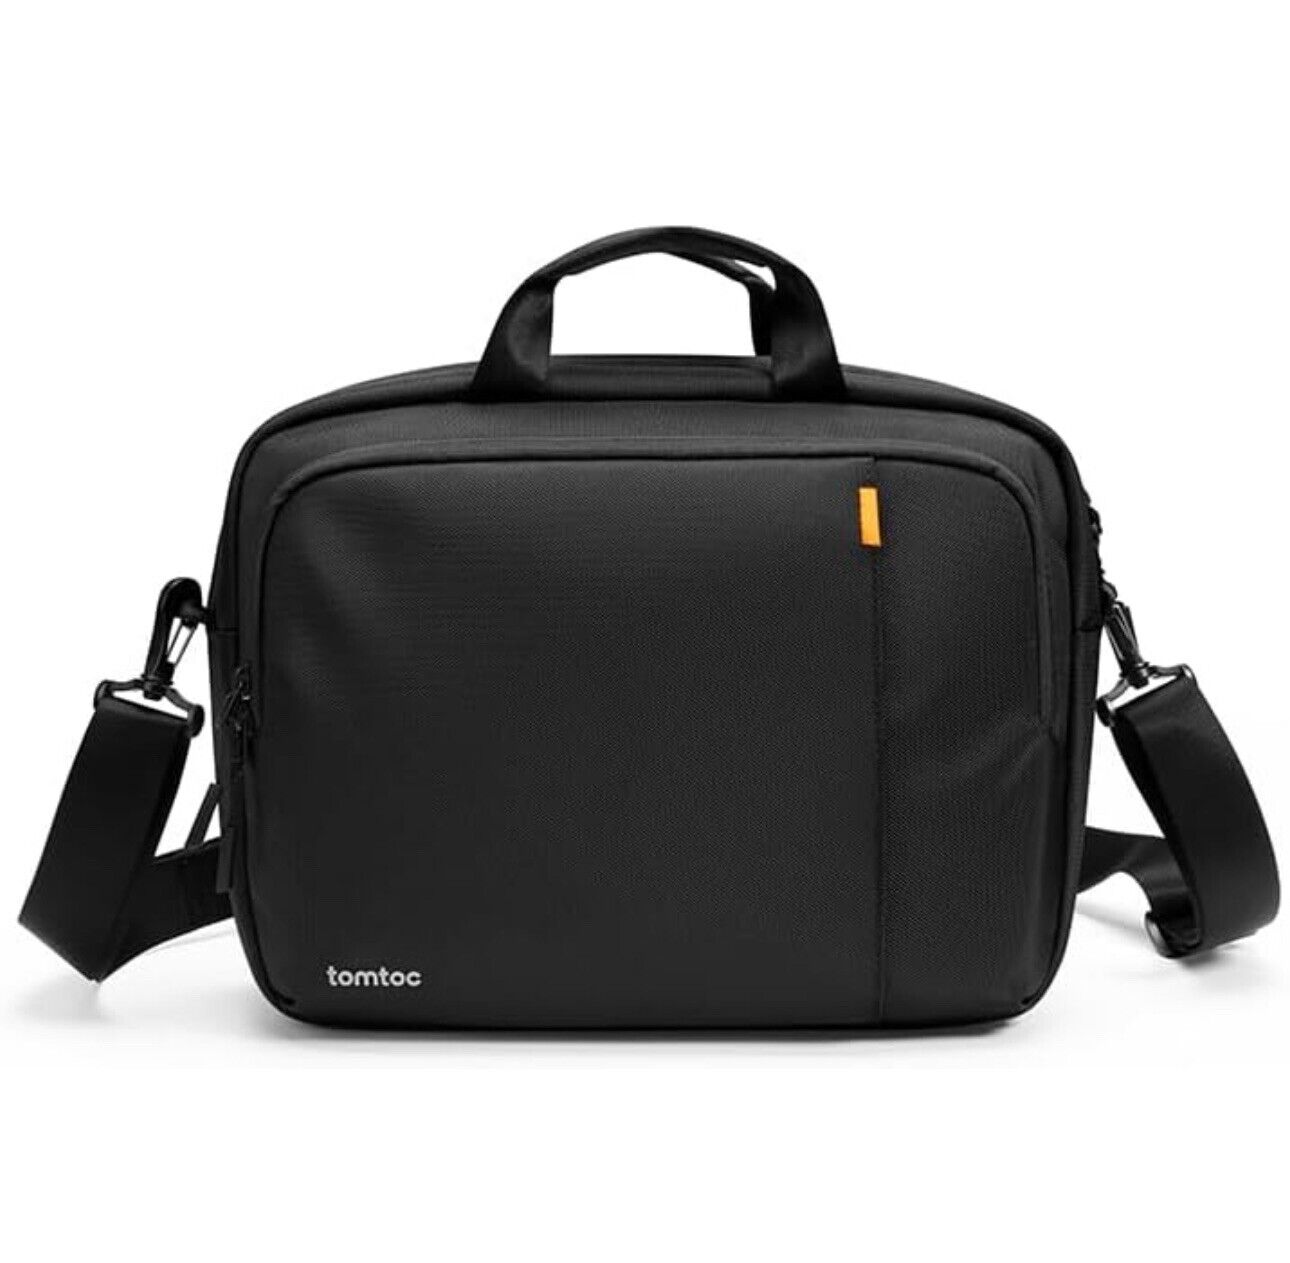 tomtoc Multi-functional Laptop Briefcase Business 14-inch, Black - Advanced 